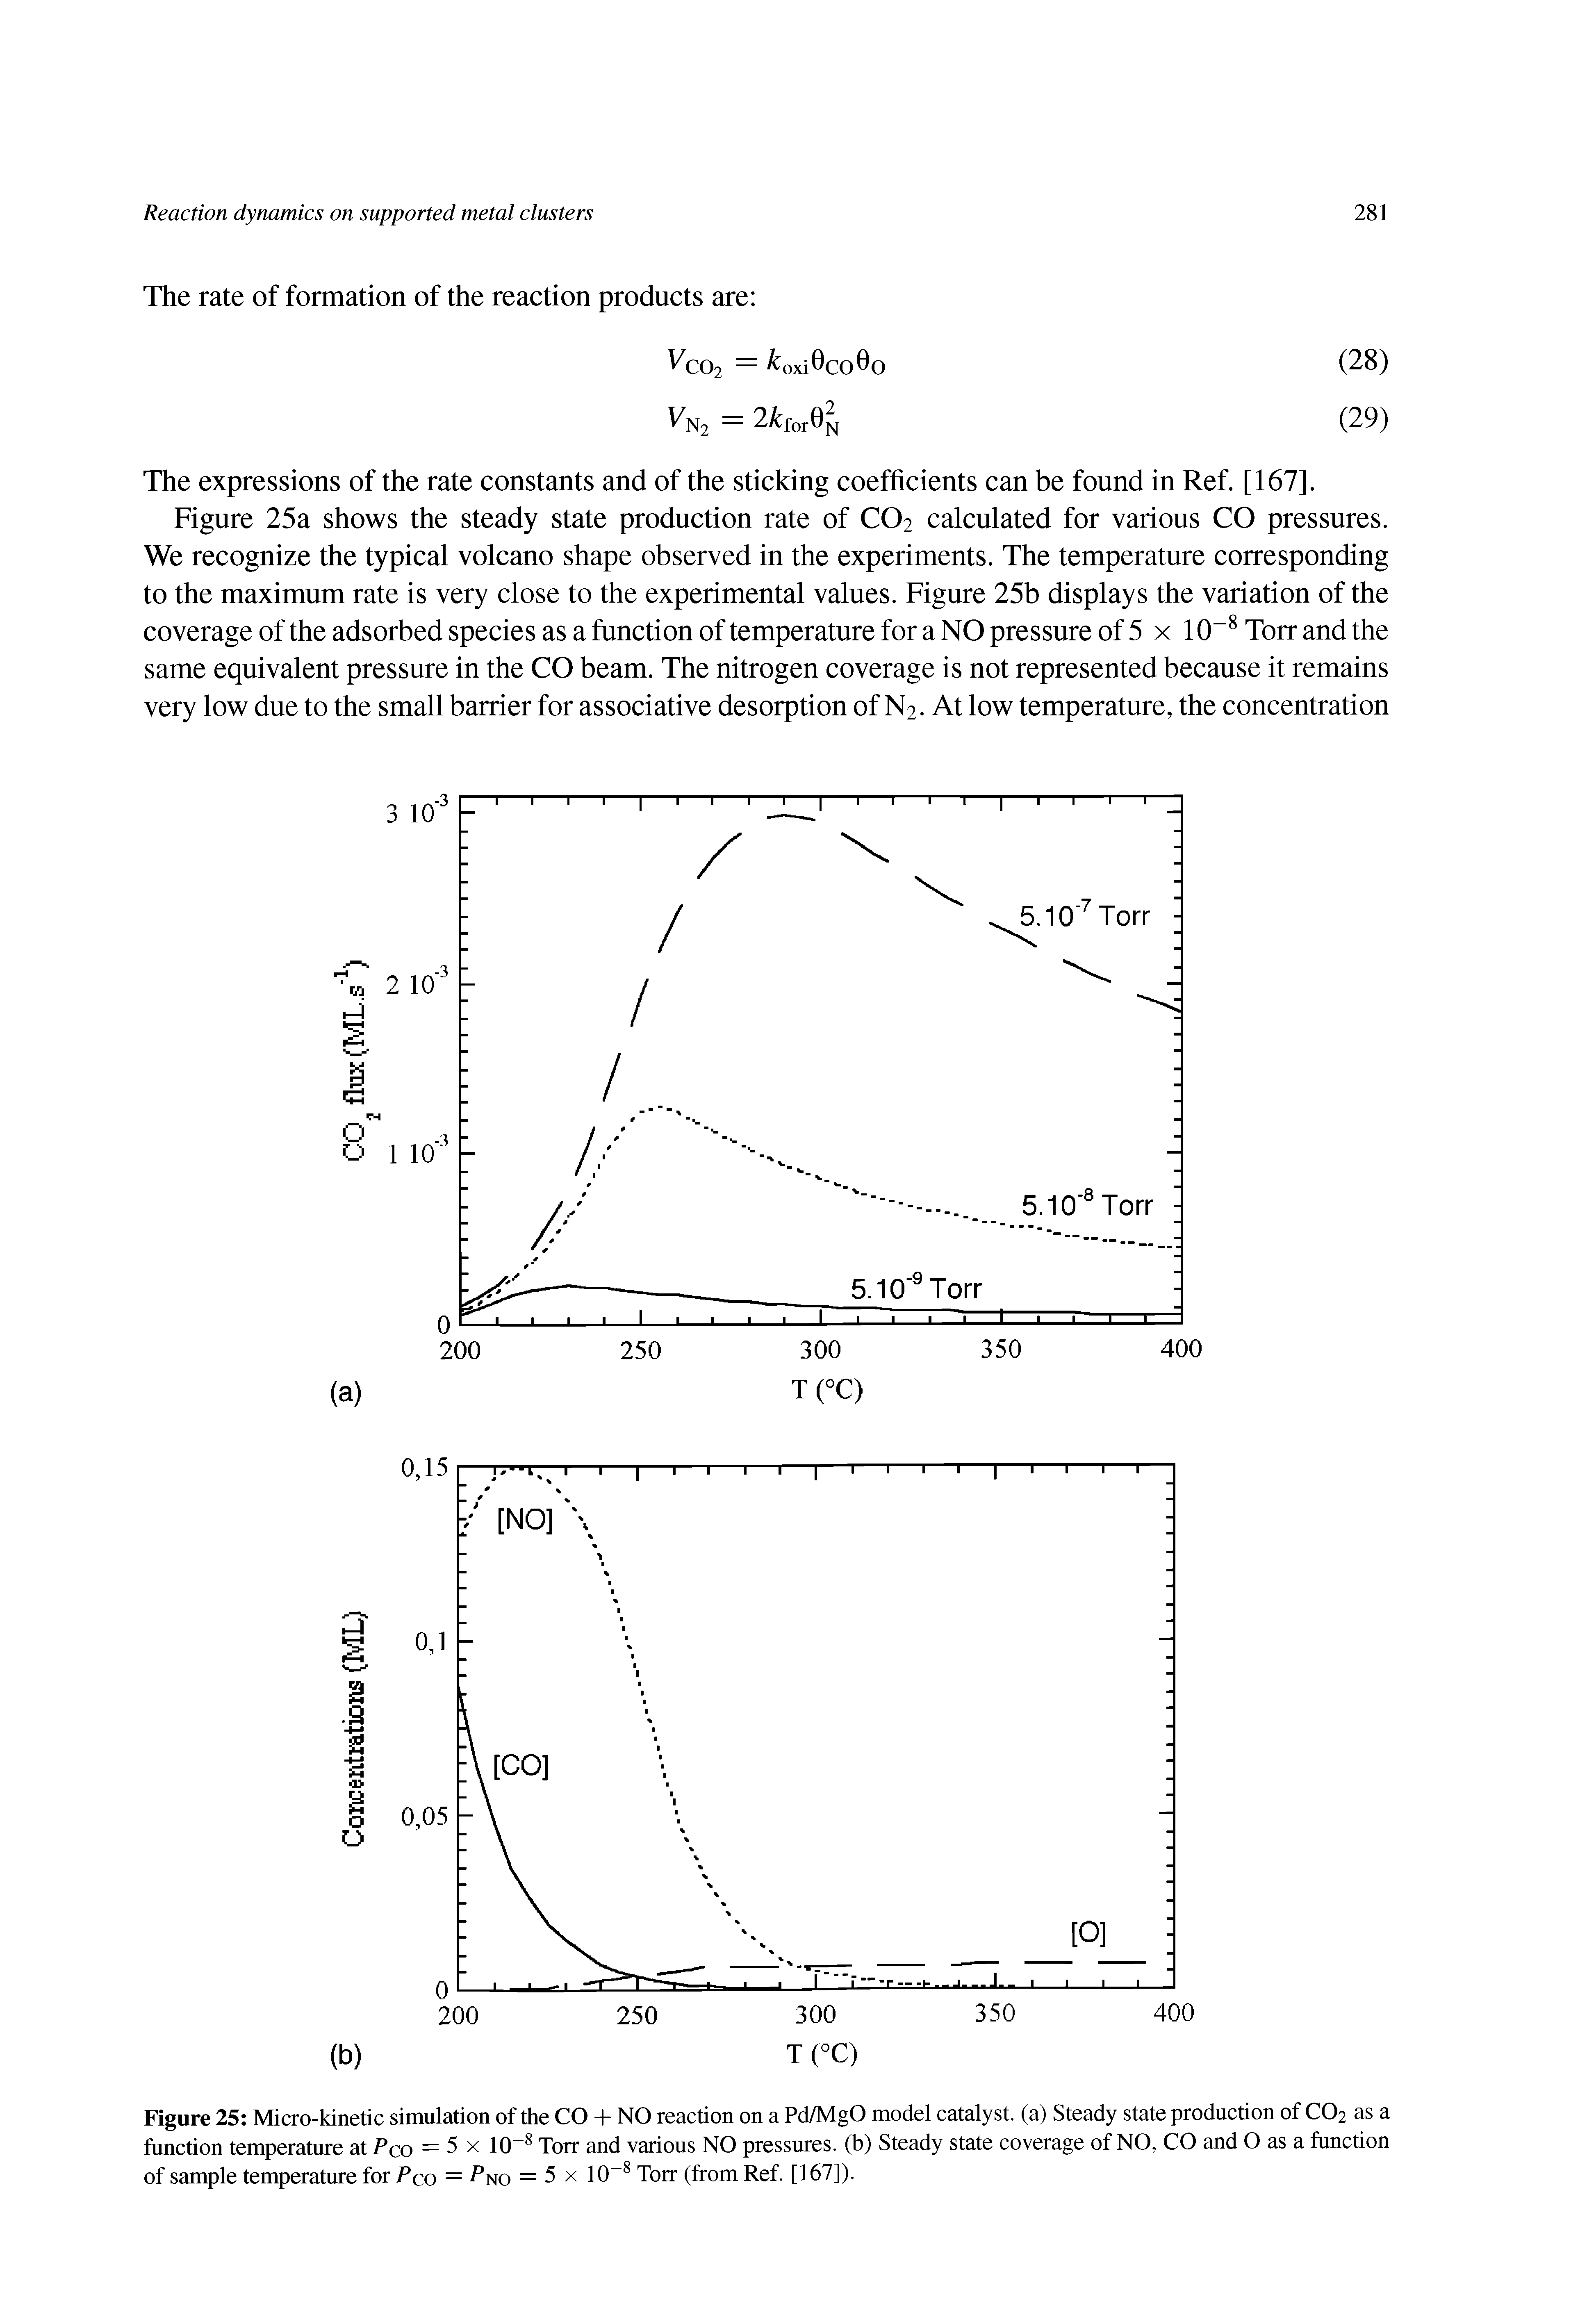 Figure 25 Micro-kinetic simulation of the CO + NO reaction on a Pd/MgO model catalyst, (a) Steady state production of C02 as a function temperature at Pco = 5 x 10 s Torr and various NO pressures, (b) Steady state coverage of NO, CO and O as a function of sample temperature for Pco = 7 no = 5 x 1CT8 Torr (from Ref. [167]).